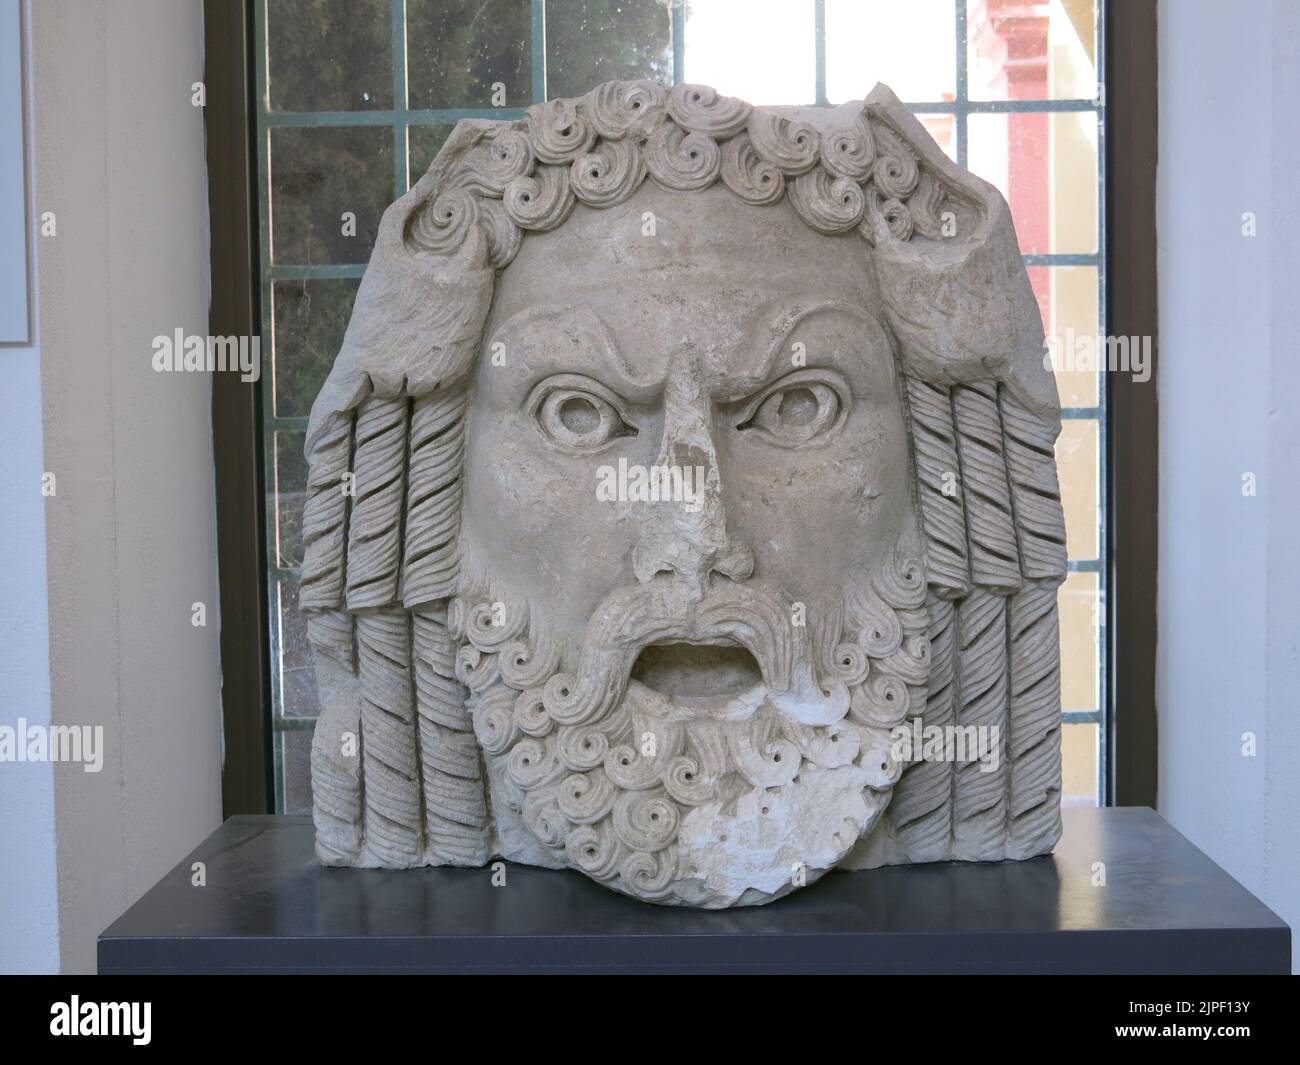 An intricately carved stone mask of the face of Hercules on display with other Roman artefacts at the Museum of Art & History in Orange. Stock Photo